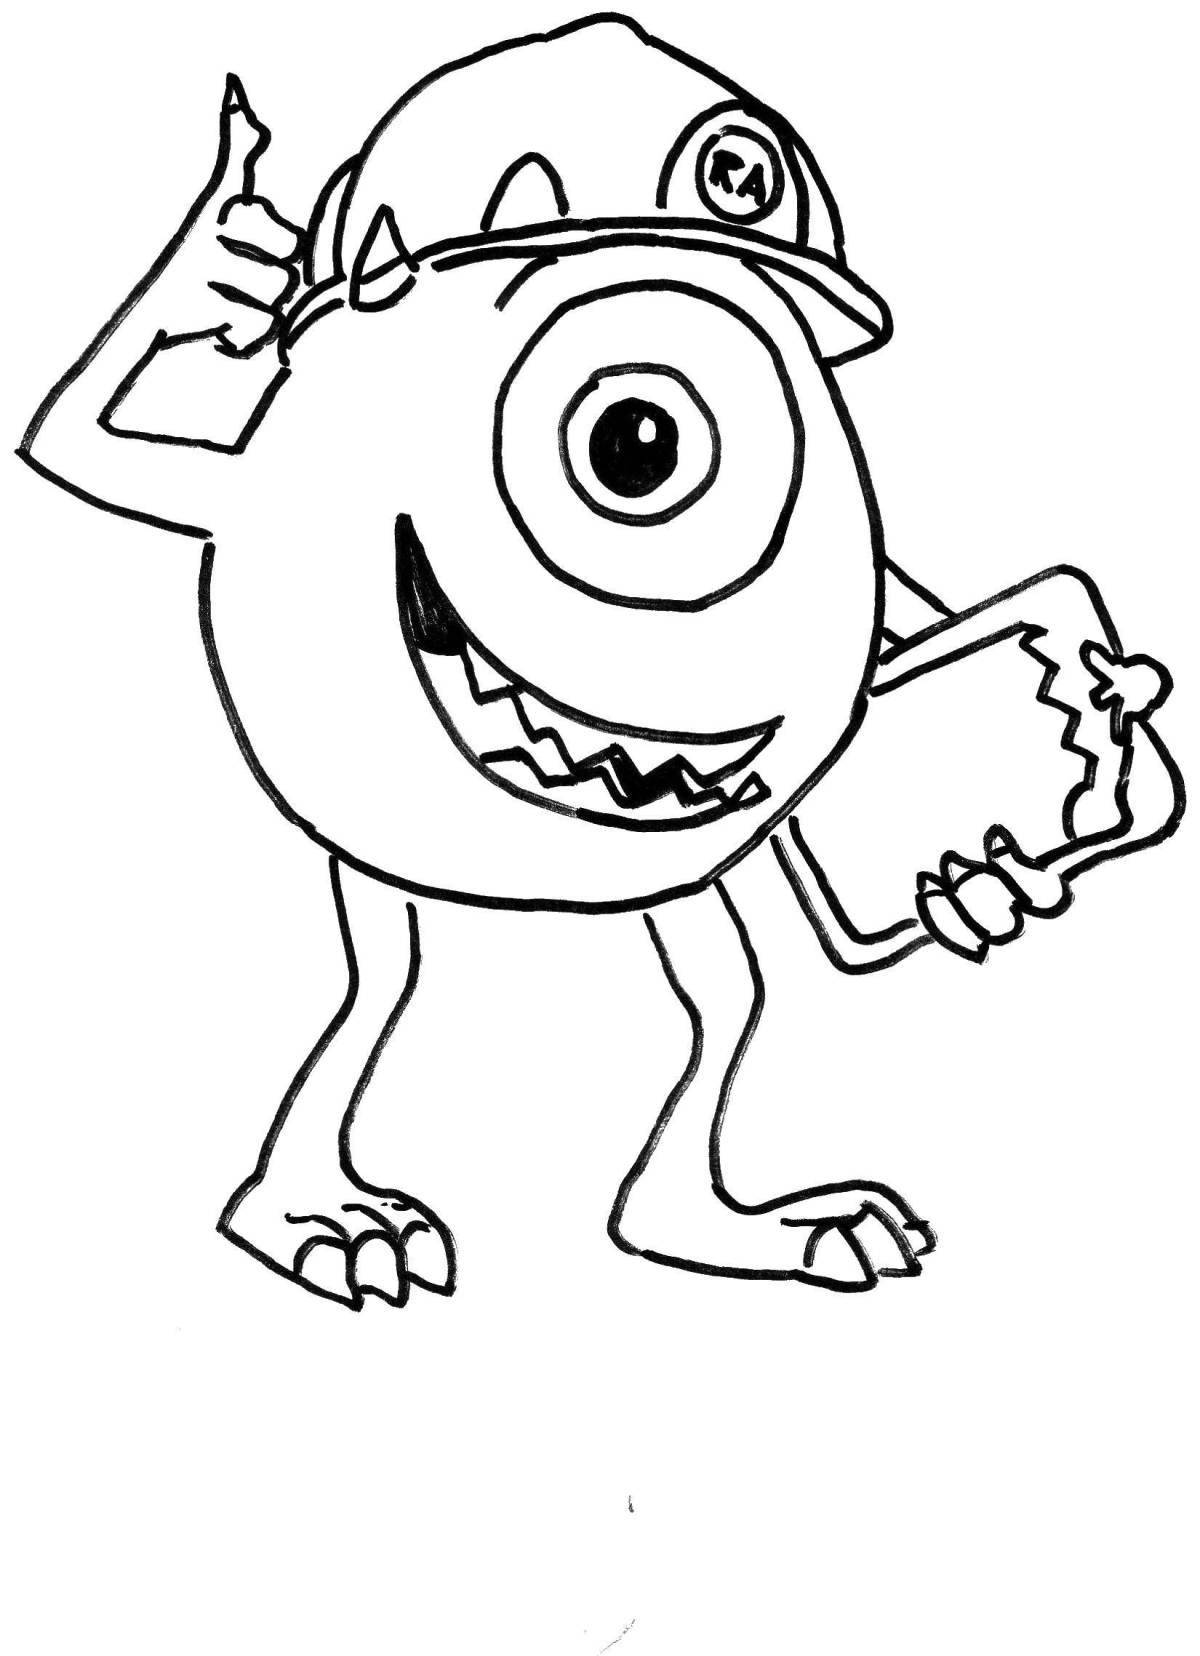 Colorful monsters inc coloring page for kids